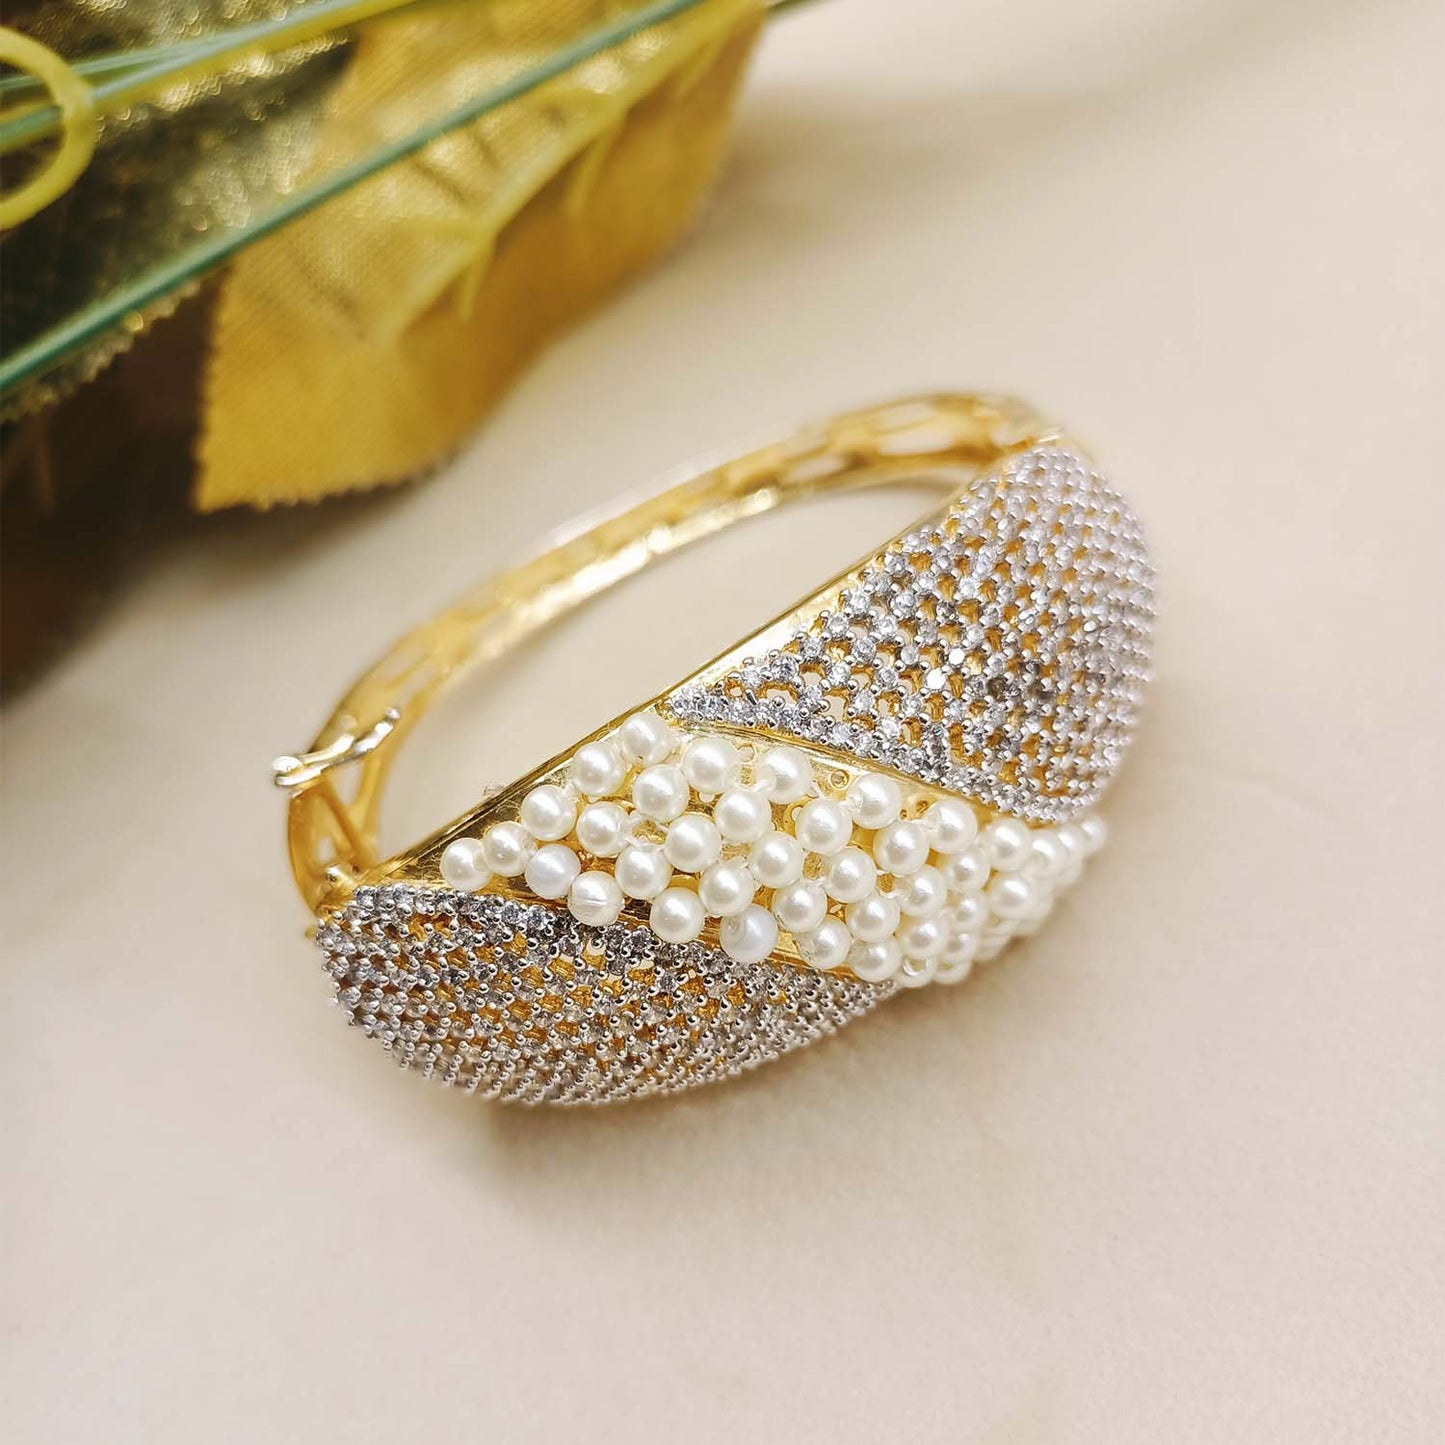 Vina Off White Beads Gold Plated American Daimond Bracelet